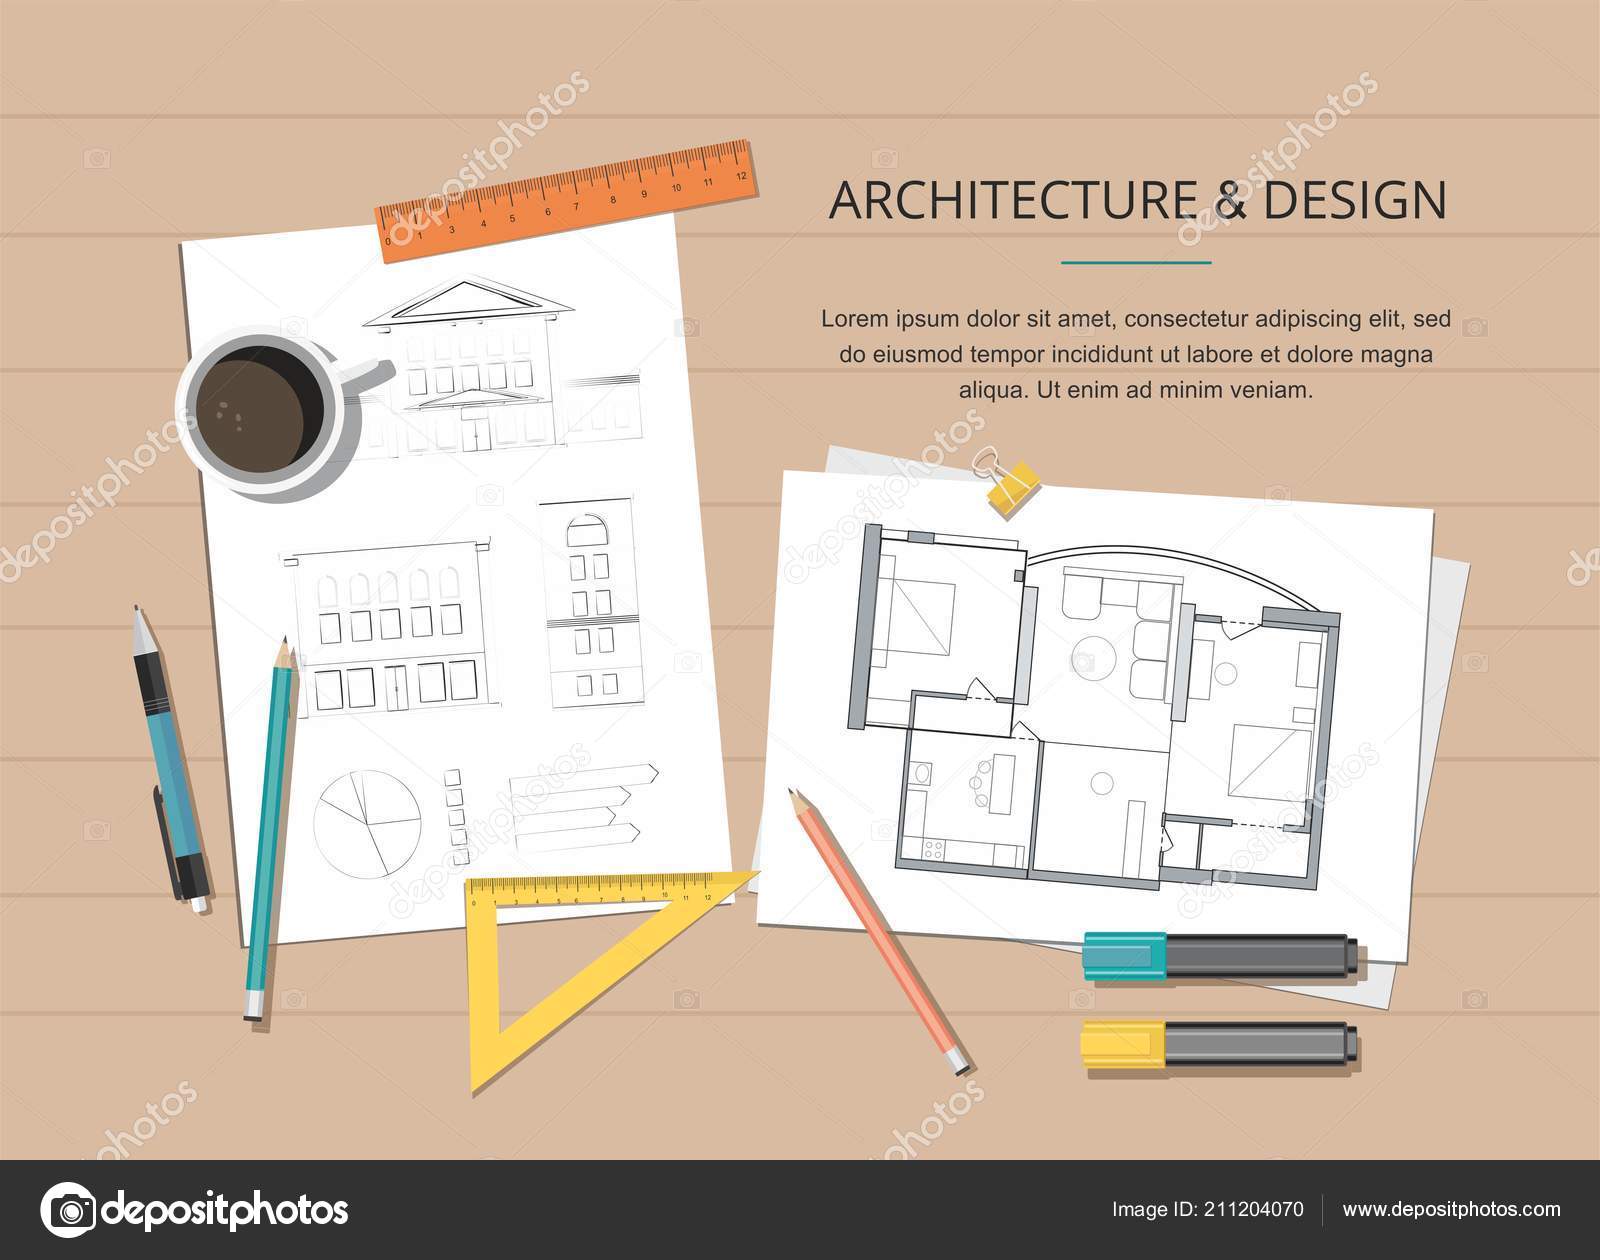 Workplace Construction Project Architect House Plan With Tools And House Drawing Construction Background Vector Image By C Medvedevadesign Vector Stock 211204070